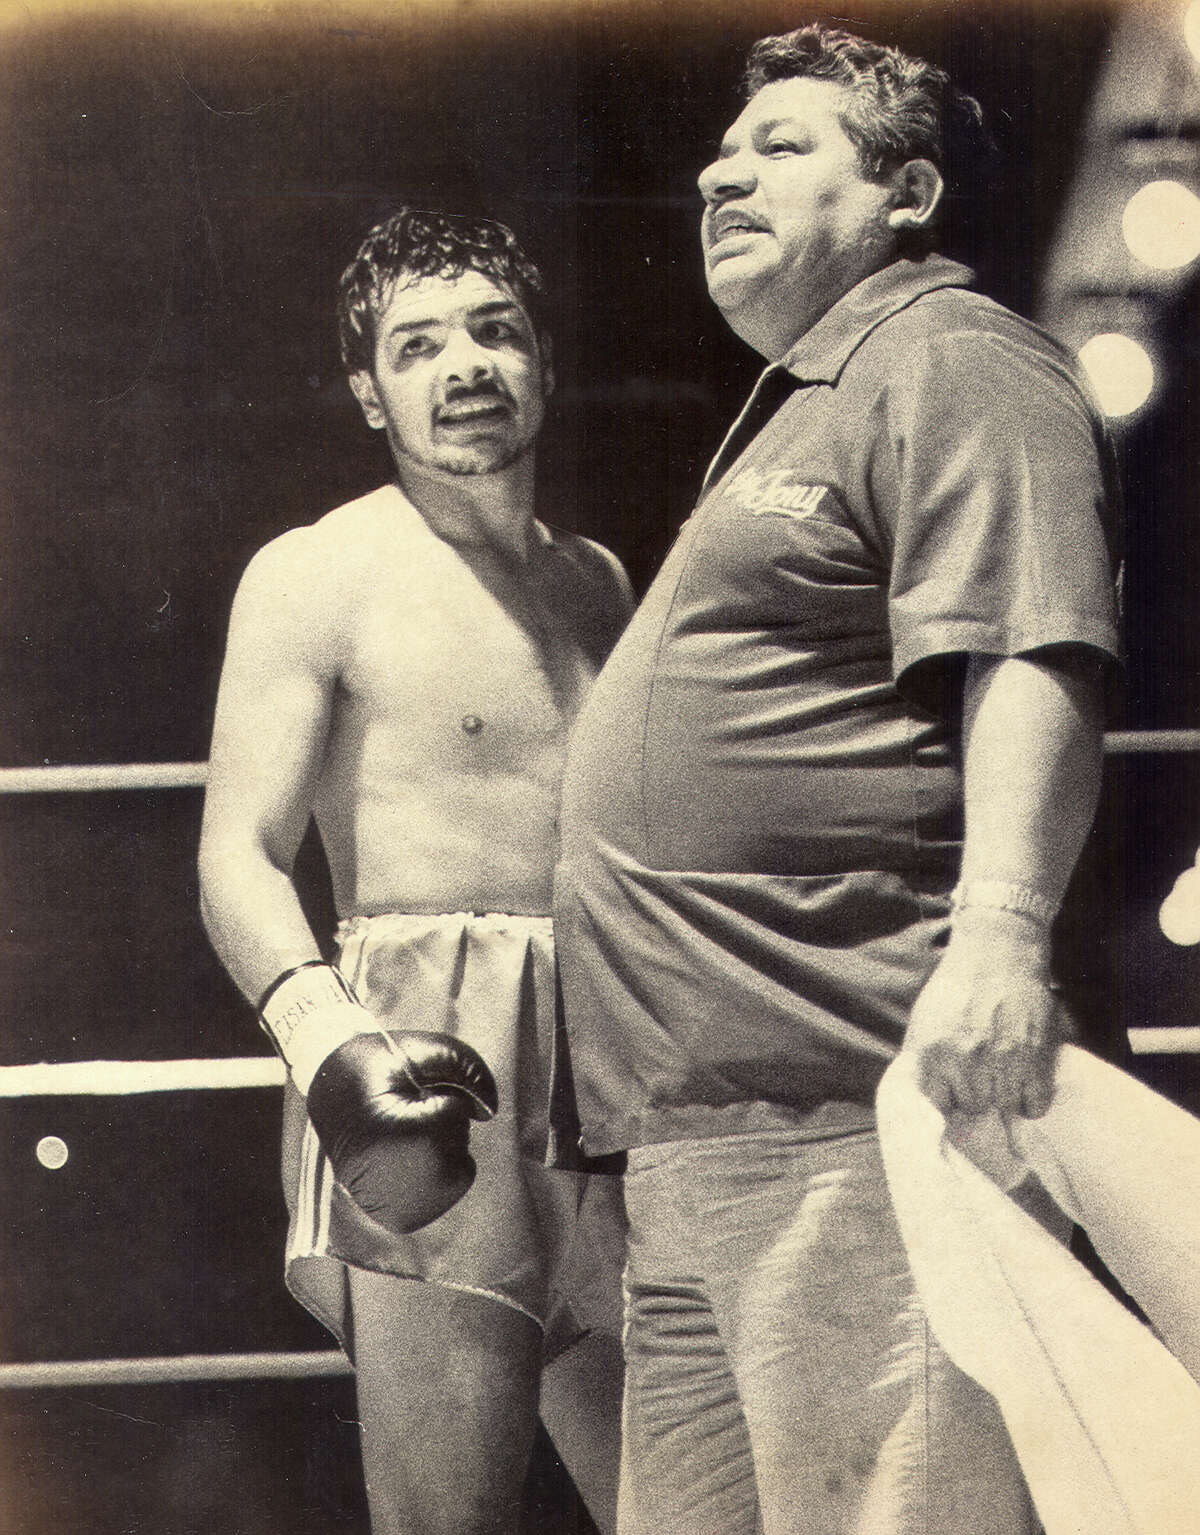 Funeral service for notable San Antonio boxing trainer Tony Ayala Sr. were held Wednesday. Ayala died April 10 at the age of 78, after a long illness.Tony Ayala, Sr. with Sammy Ayala in a 1982 fight.